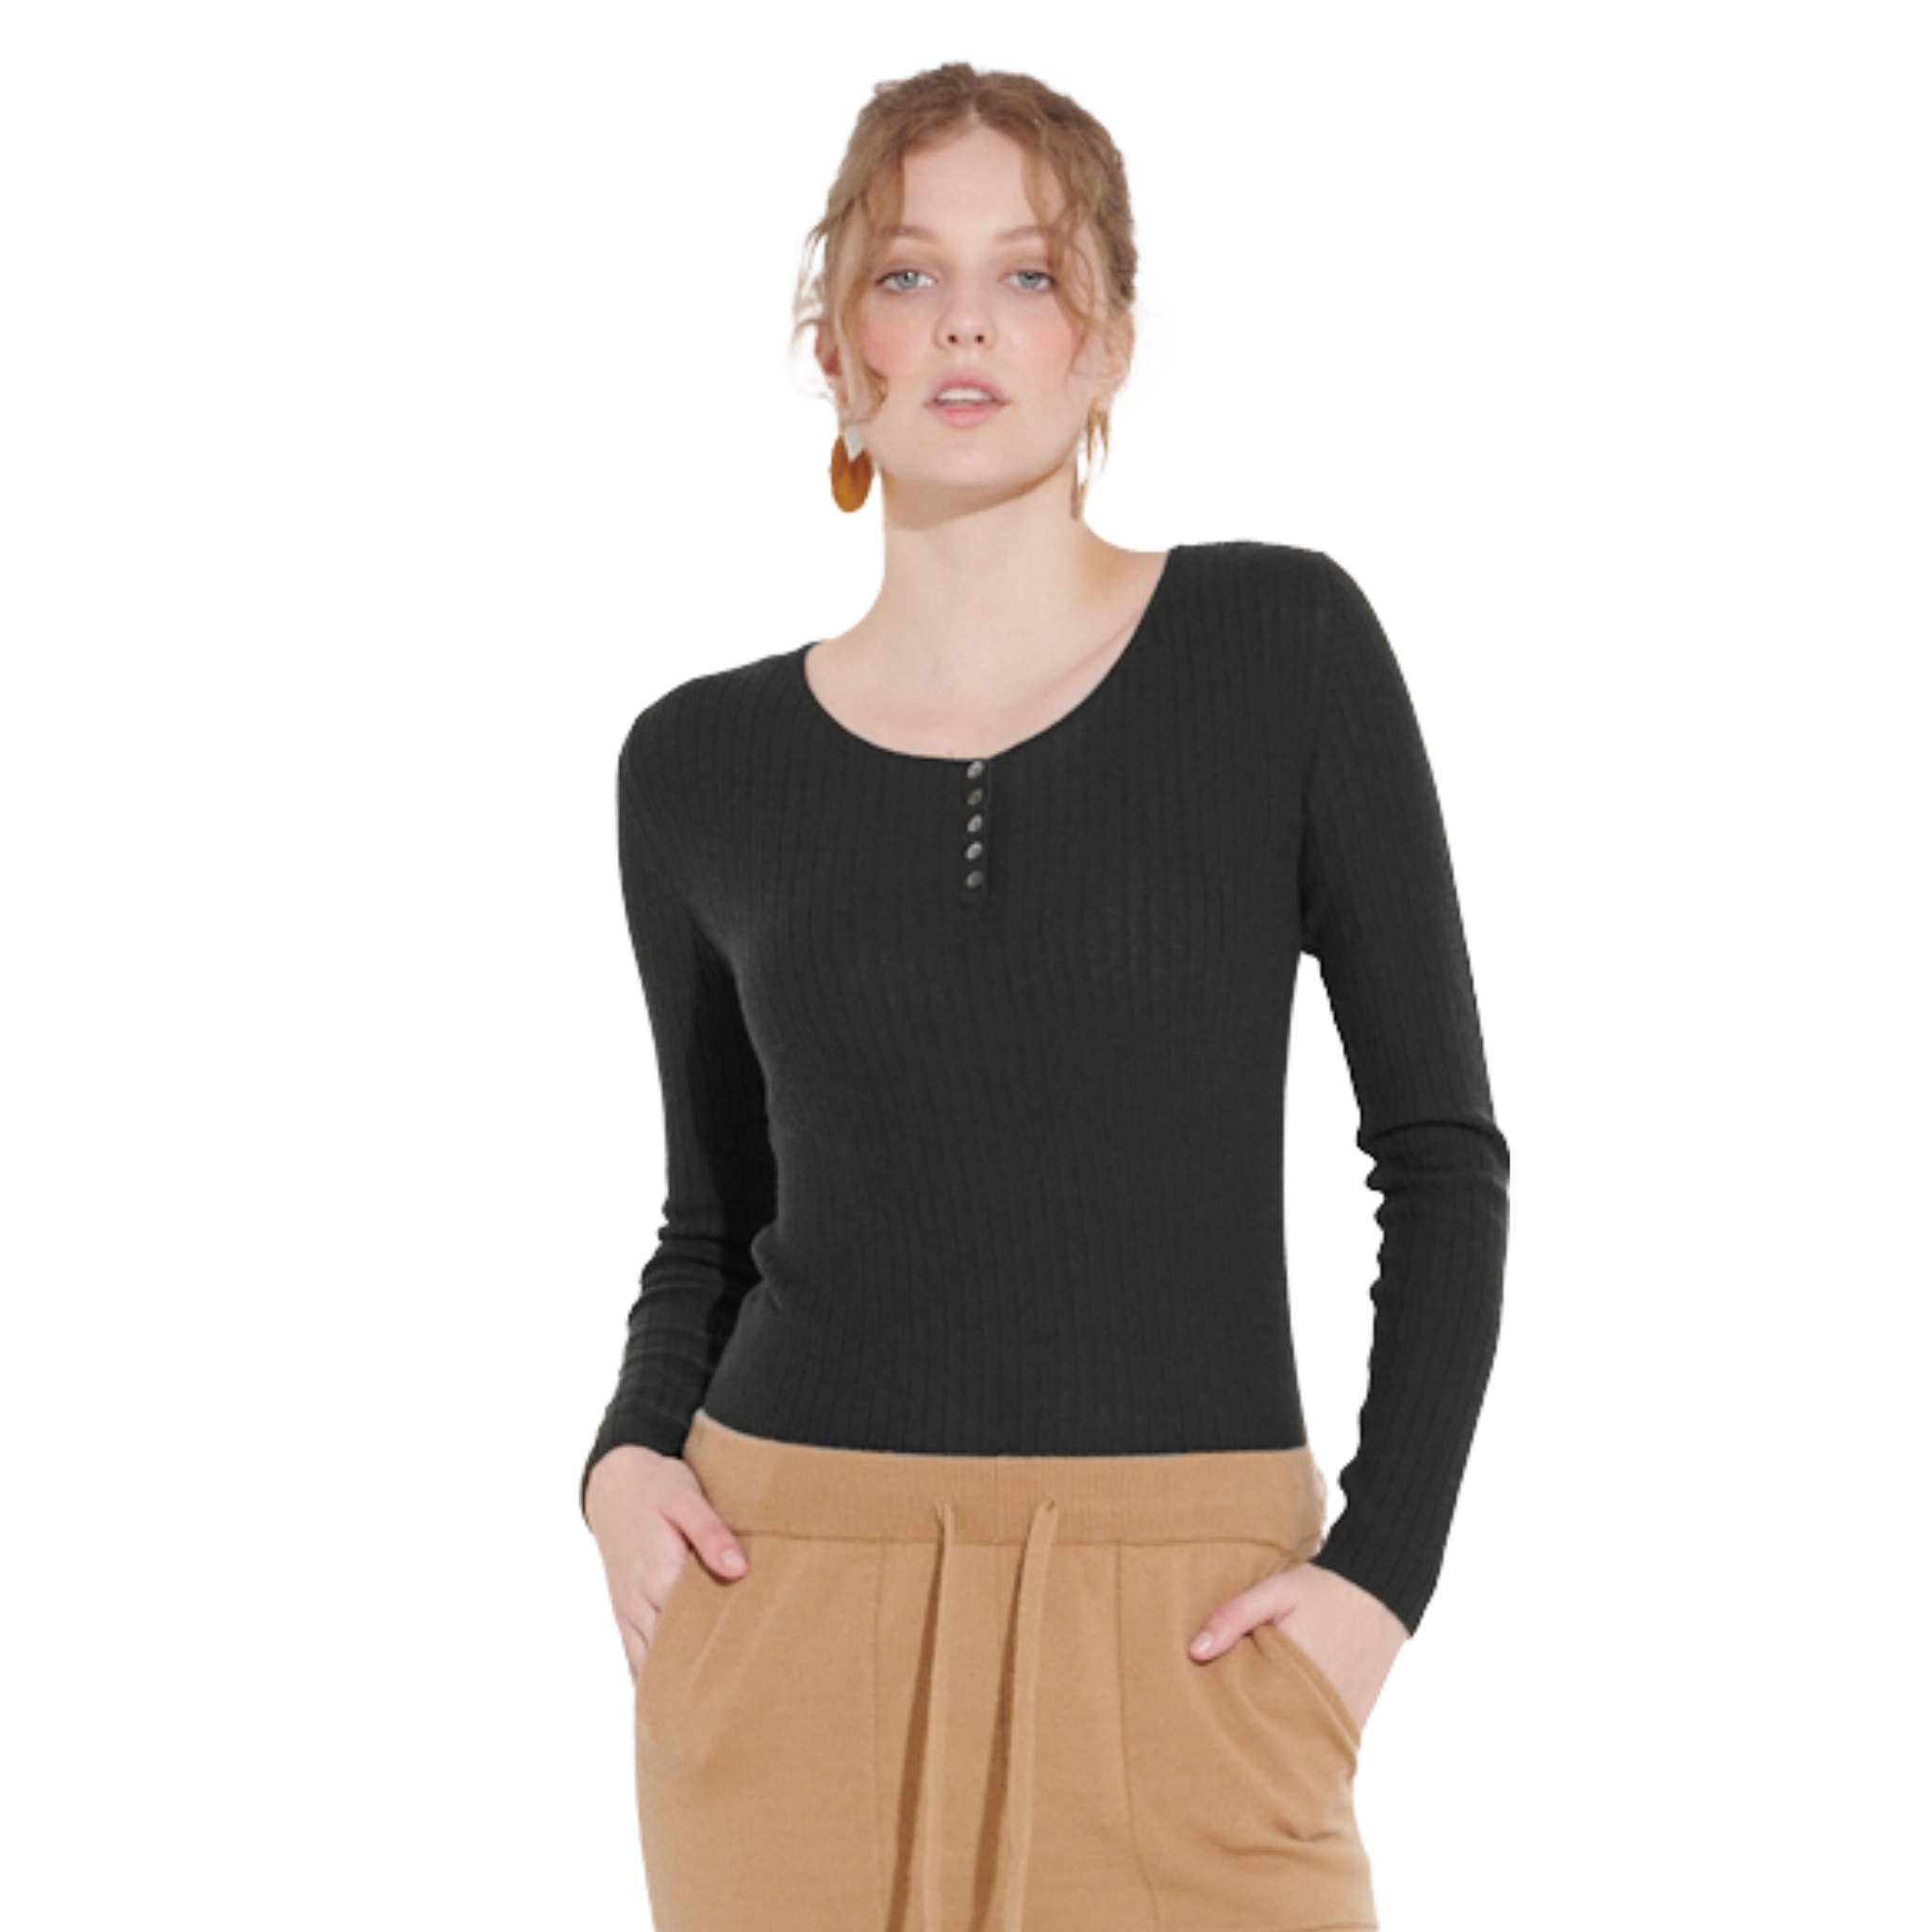 Cashmerism 100% Cashmere Long Sleeve Henly Top